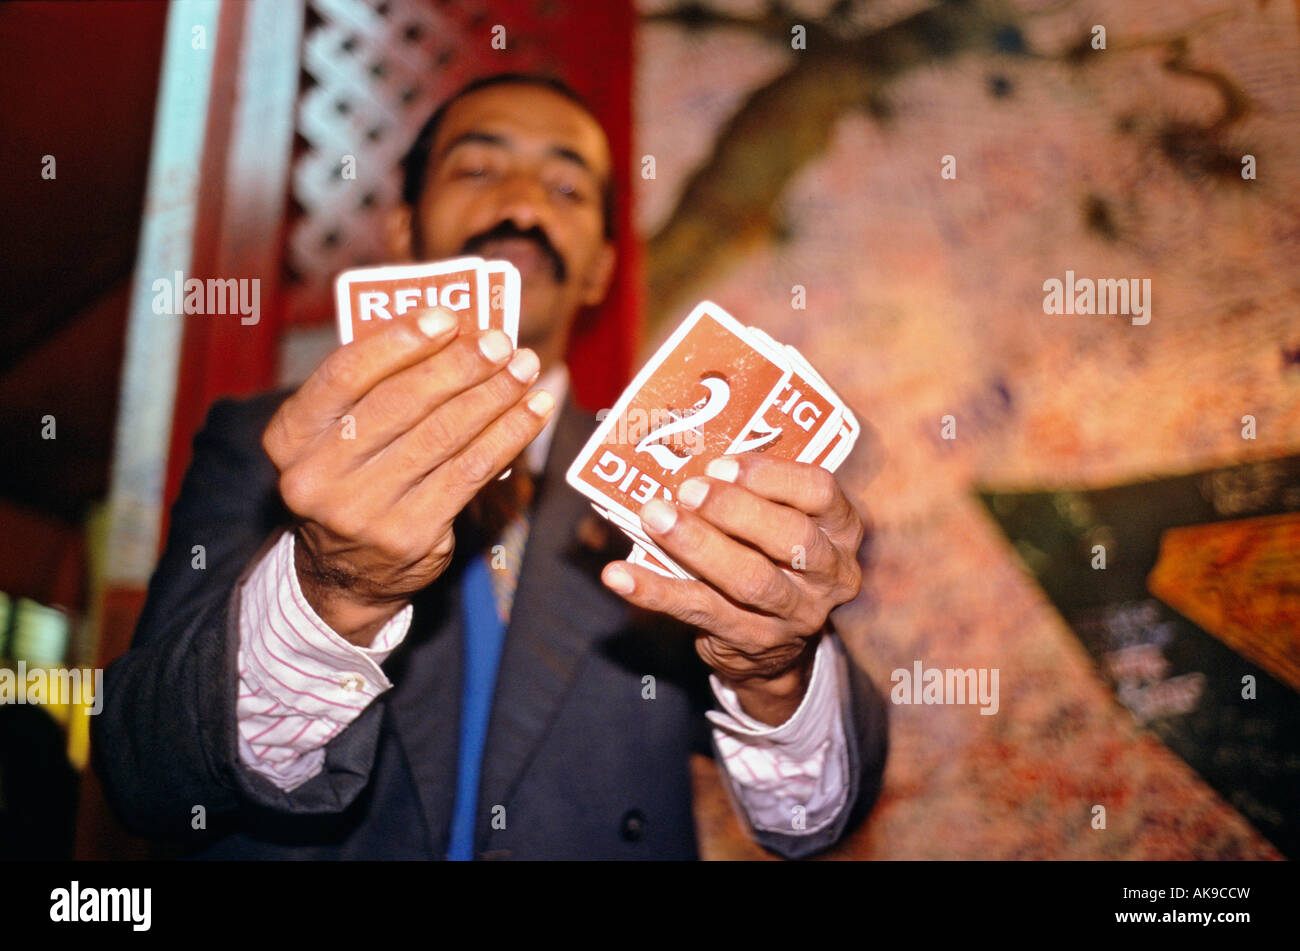 Chinese Cuban magician entertains with card tricks at a restaurant in the Barrio Chino Havana Cuba s Chinatown Stock Photo